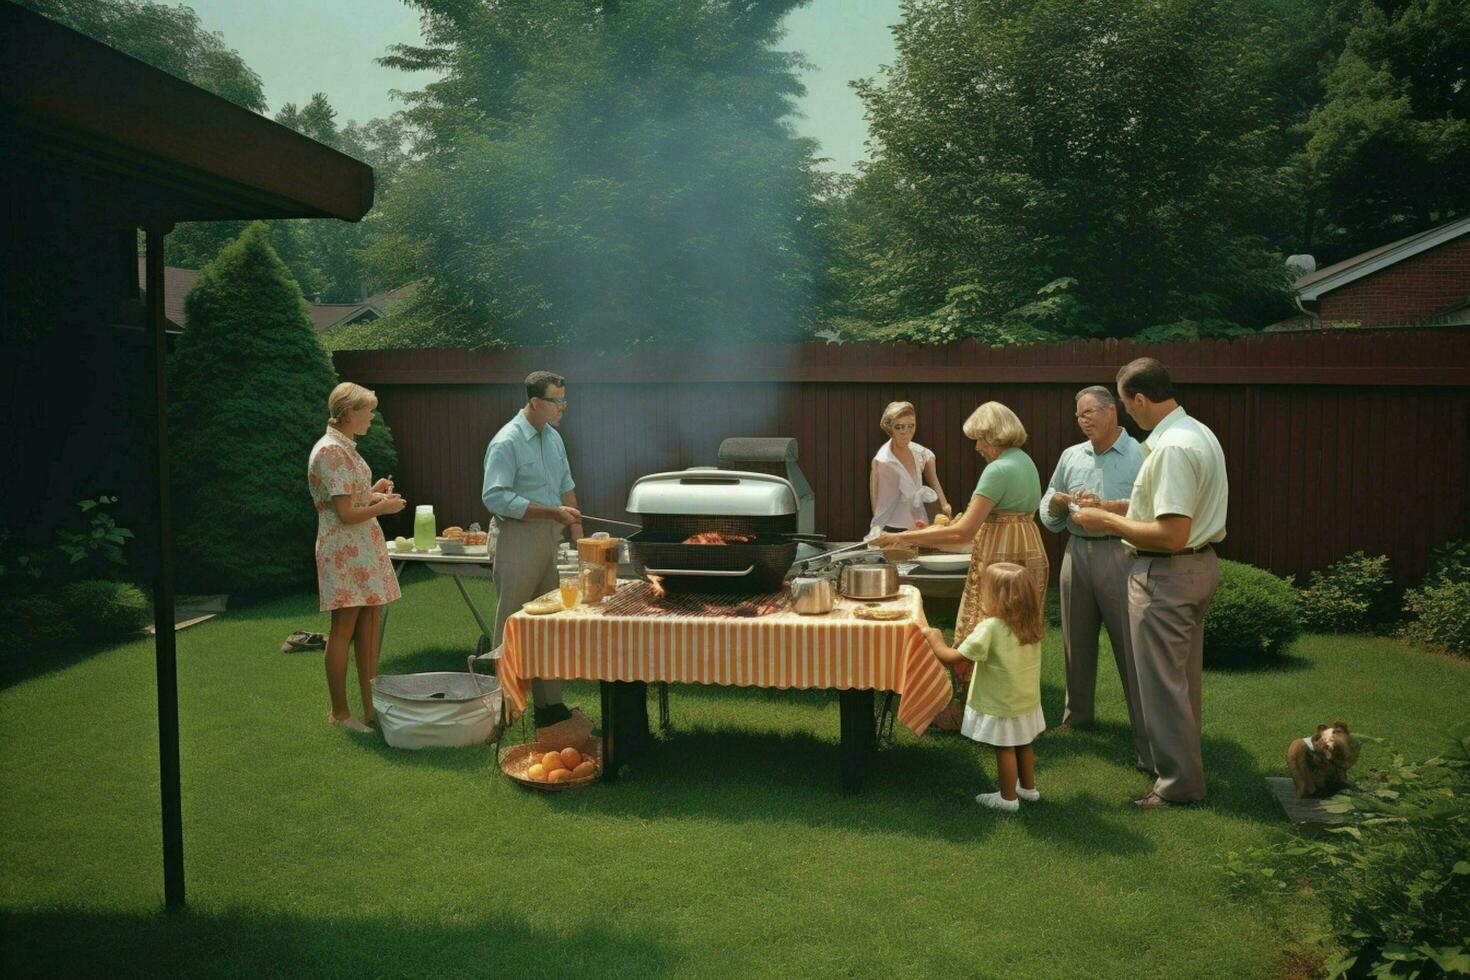 A family cookout in the backyard photo